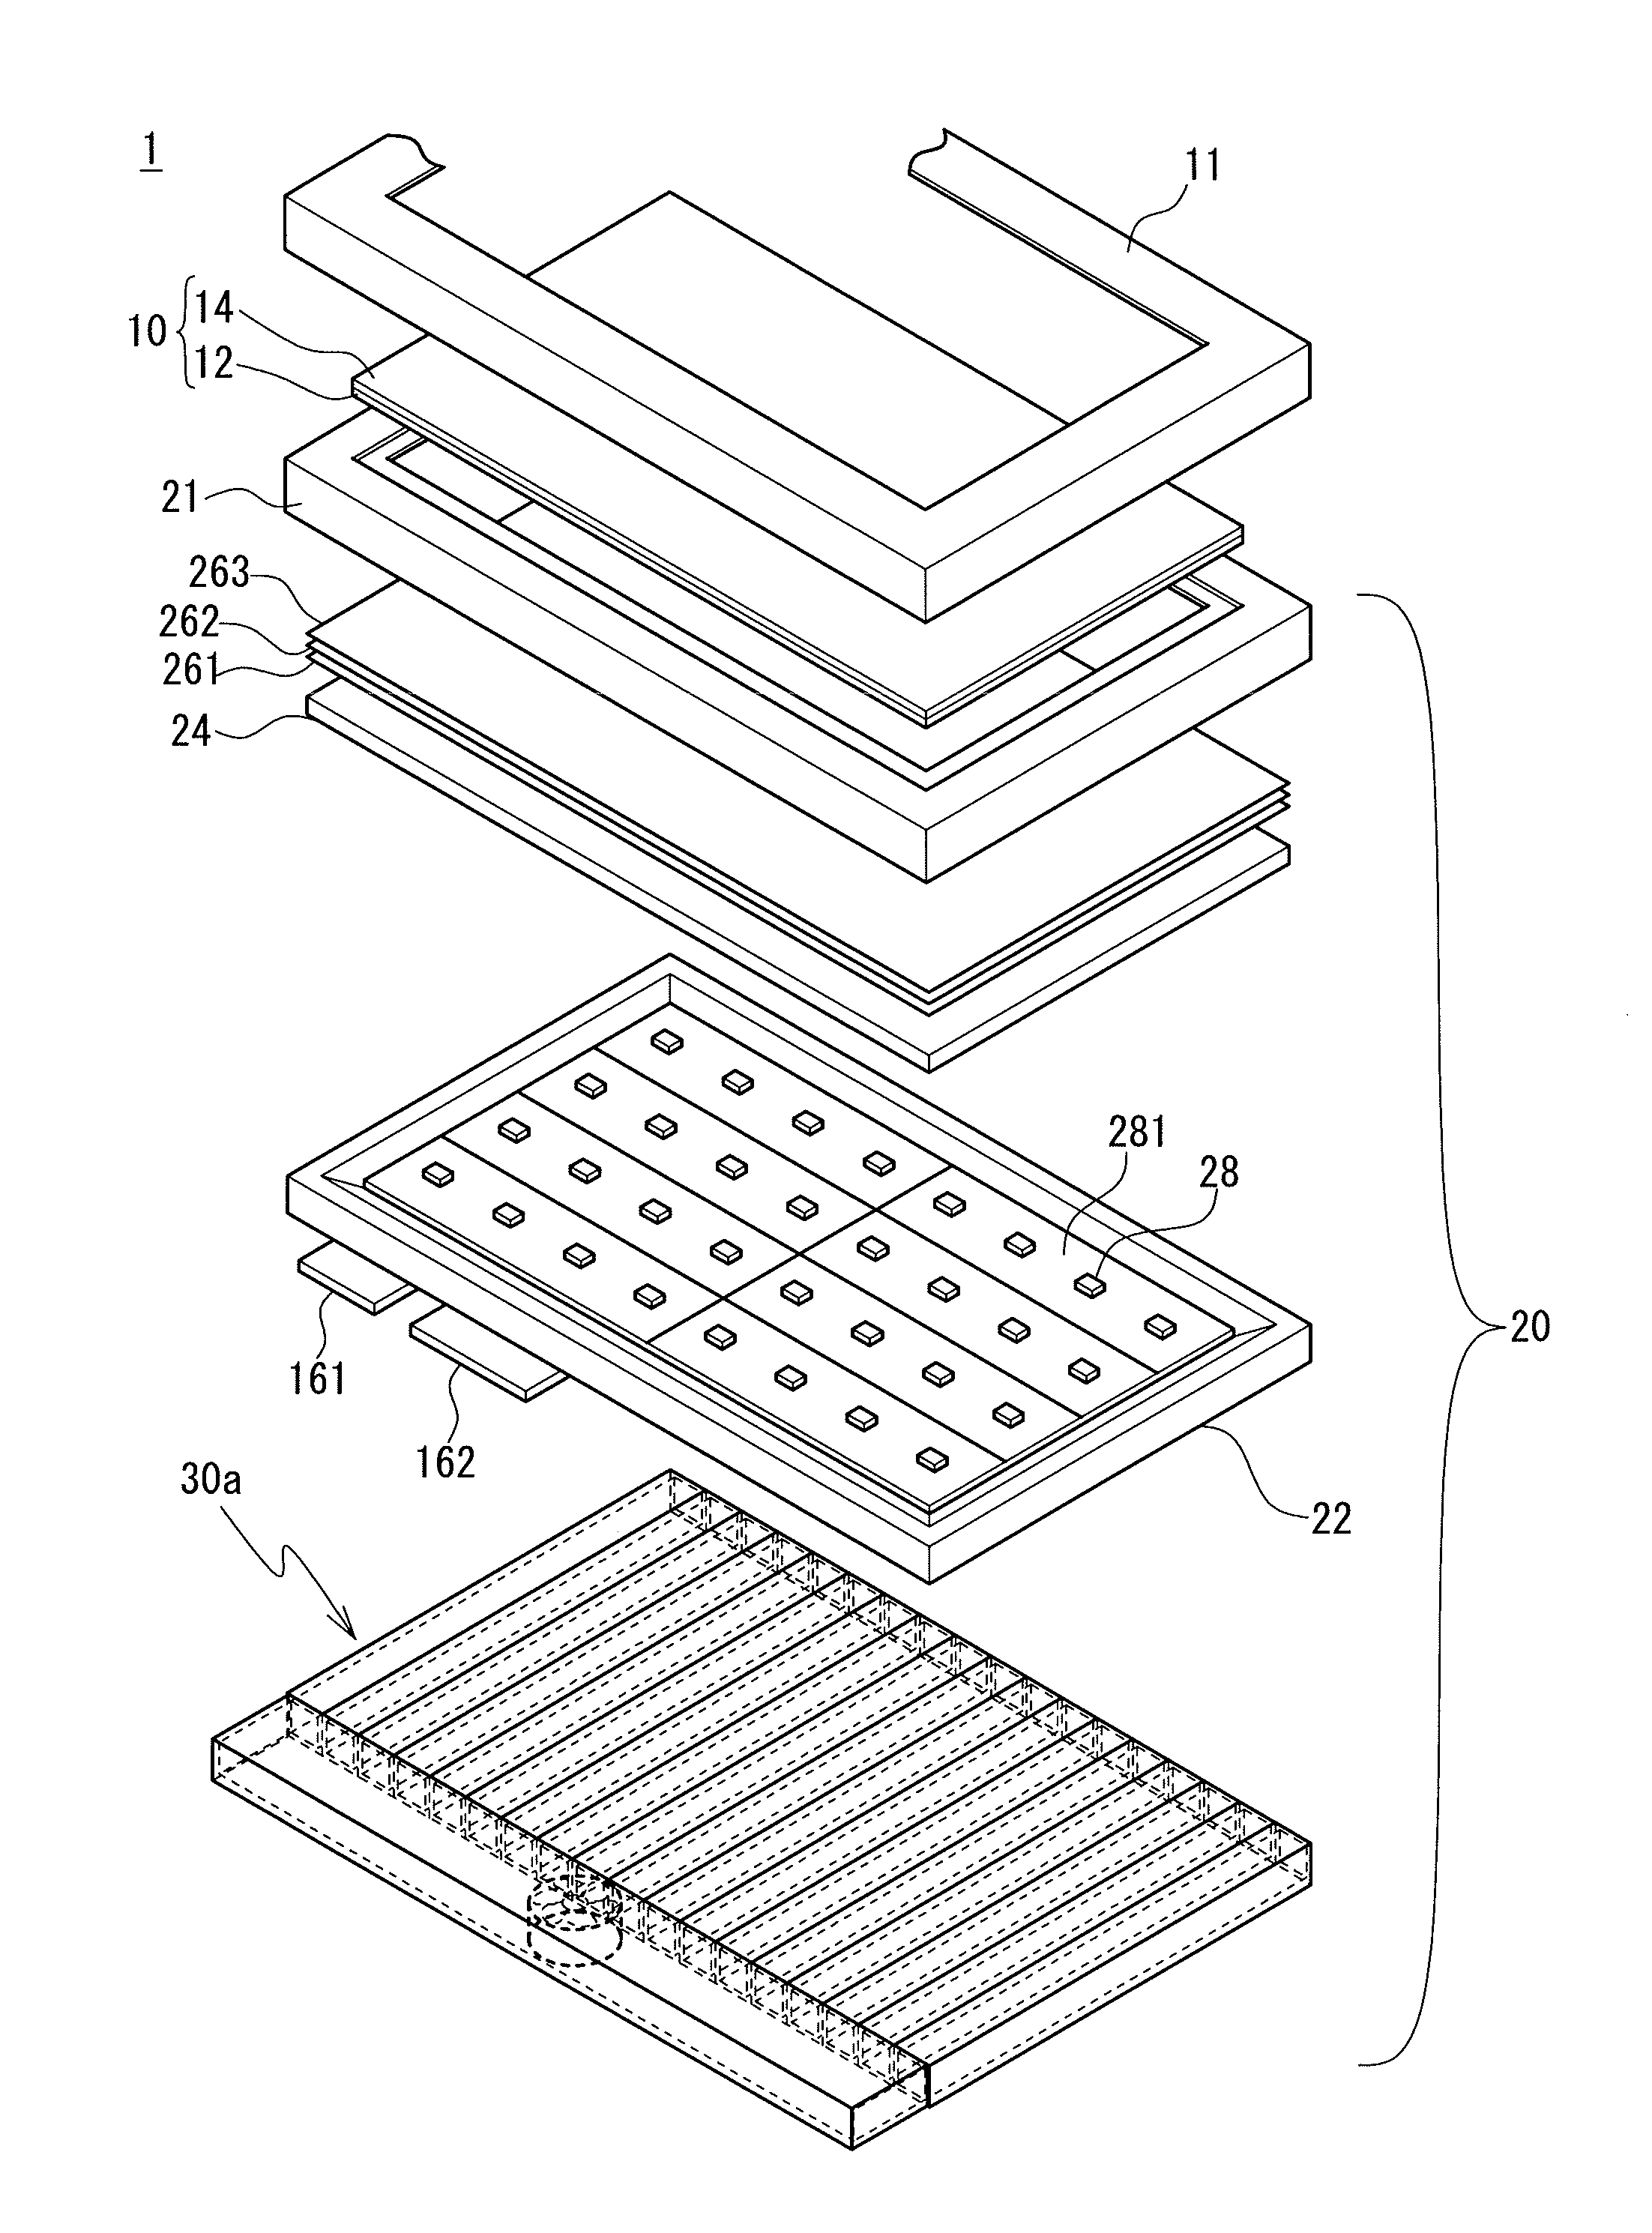 Liquid crystal display device, and LED backlight unit